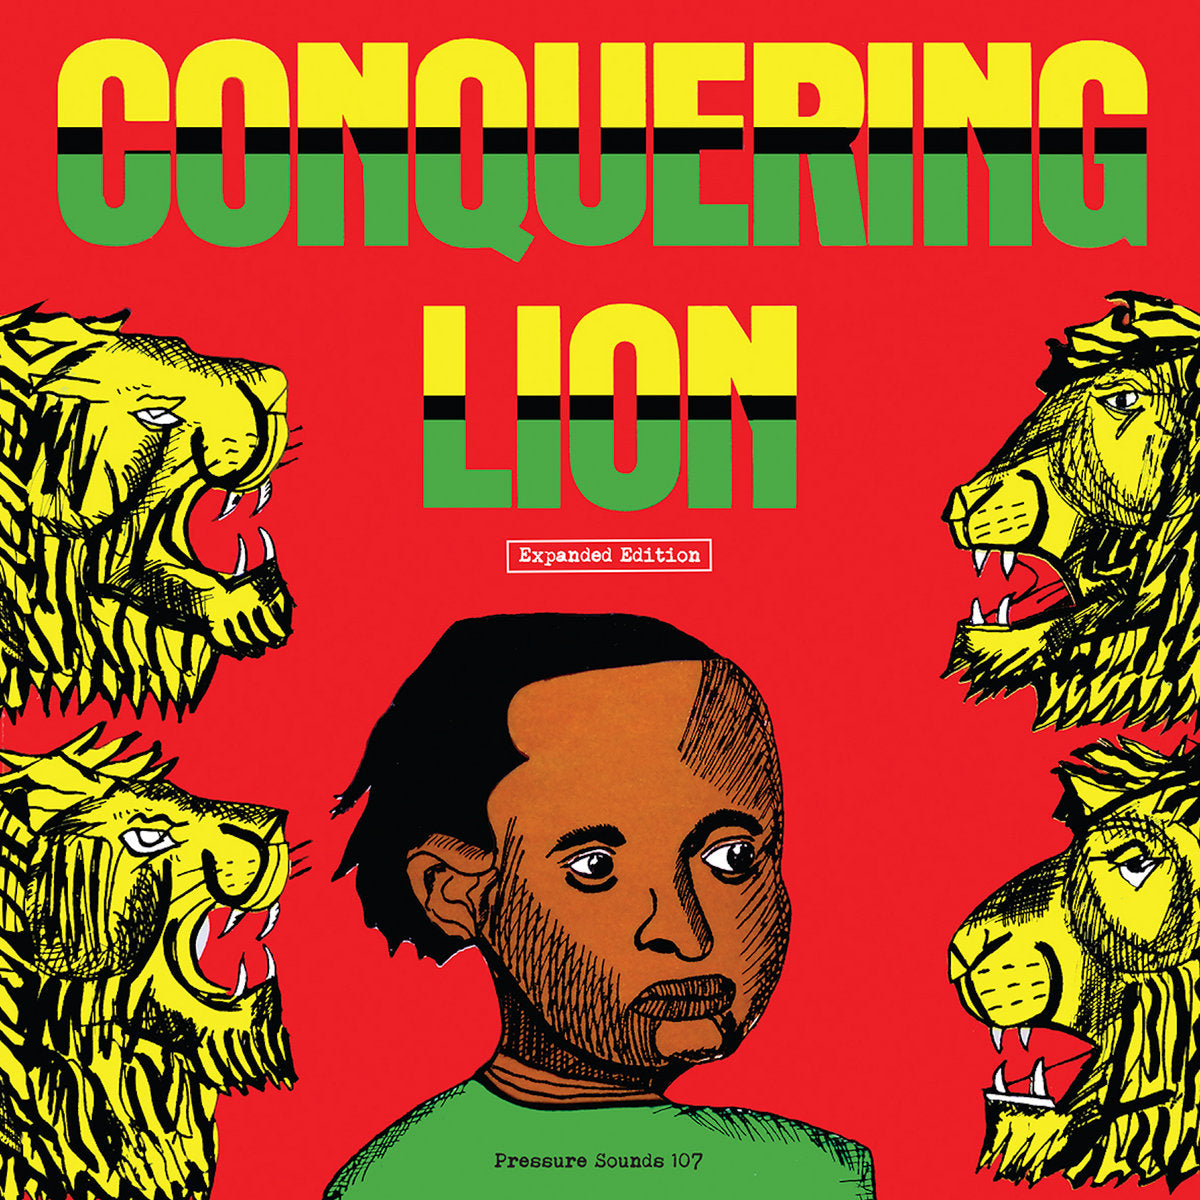 Conquering Lion (Expanded Edition) (New 2LP)